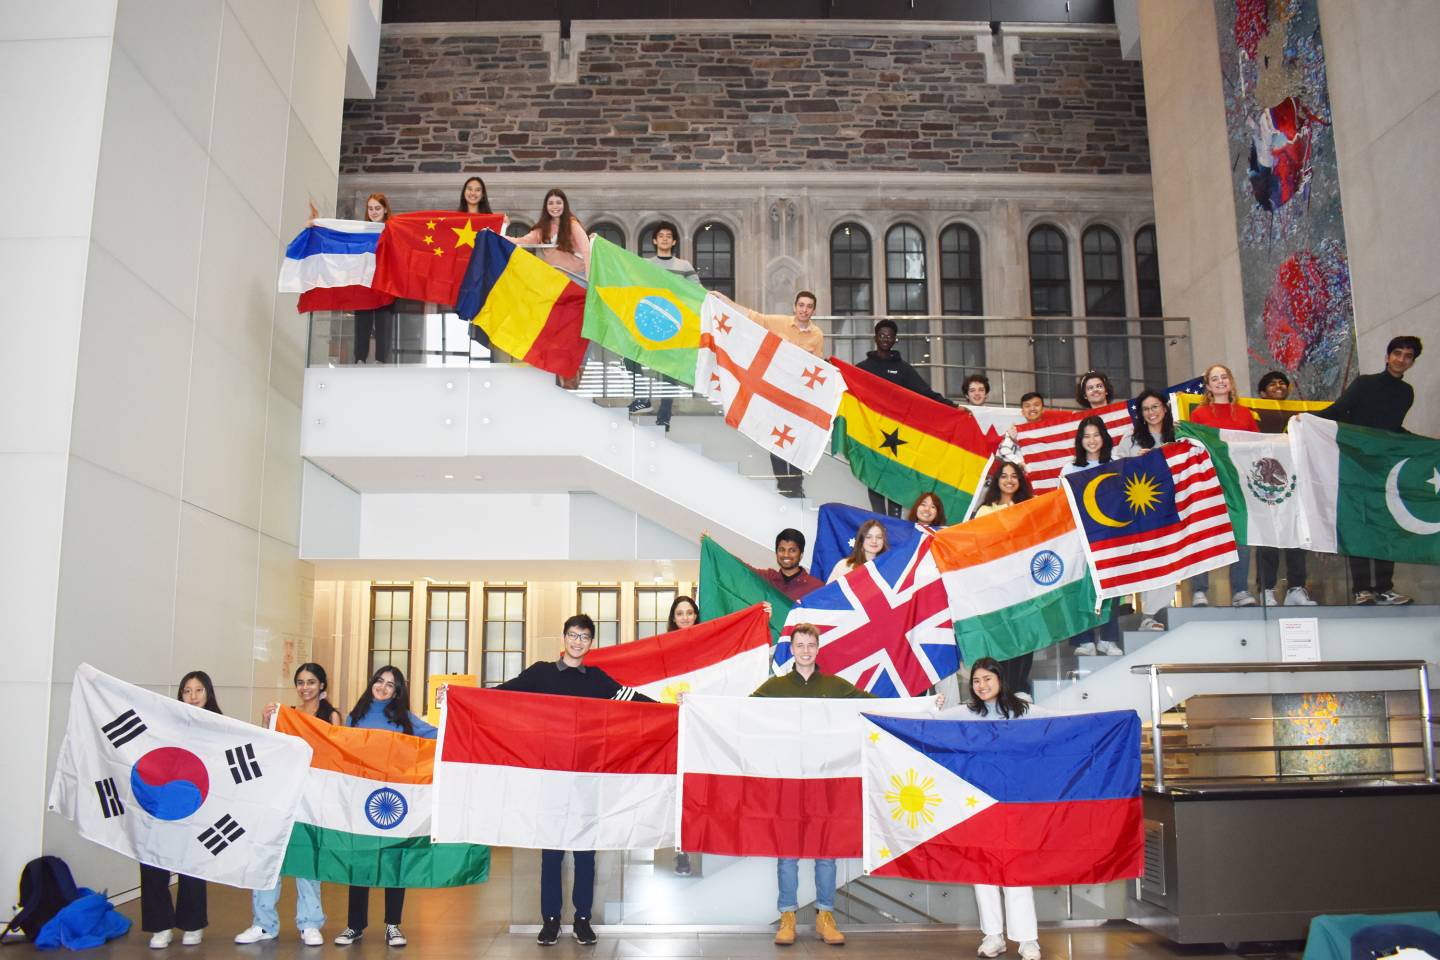 International Students holding the flags of their home nations pose on a stairway inside the Simpson International Building